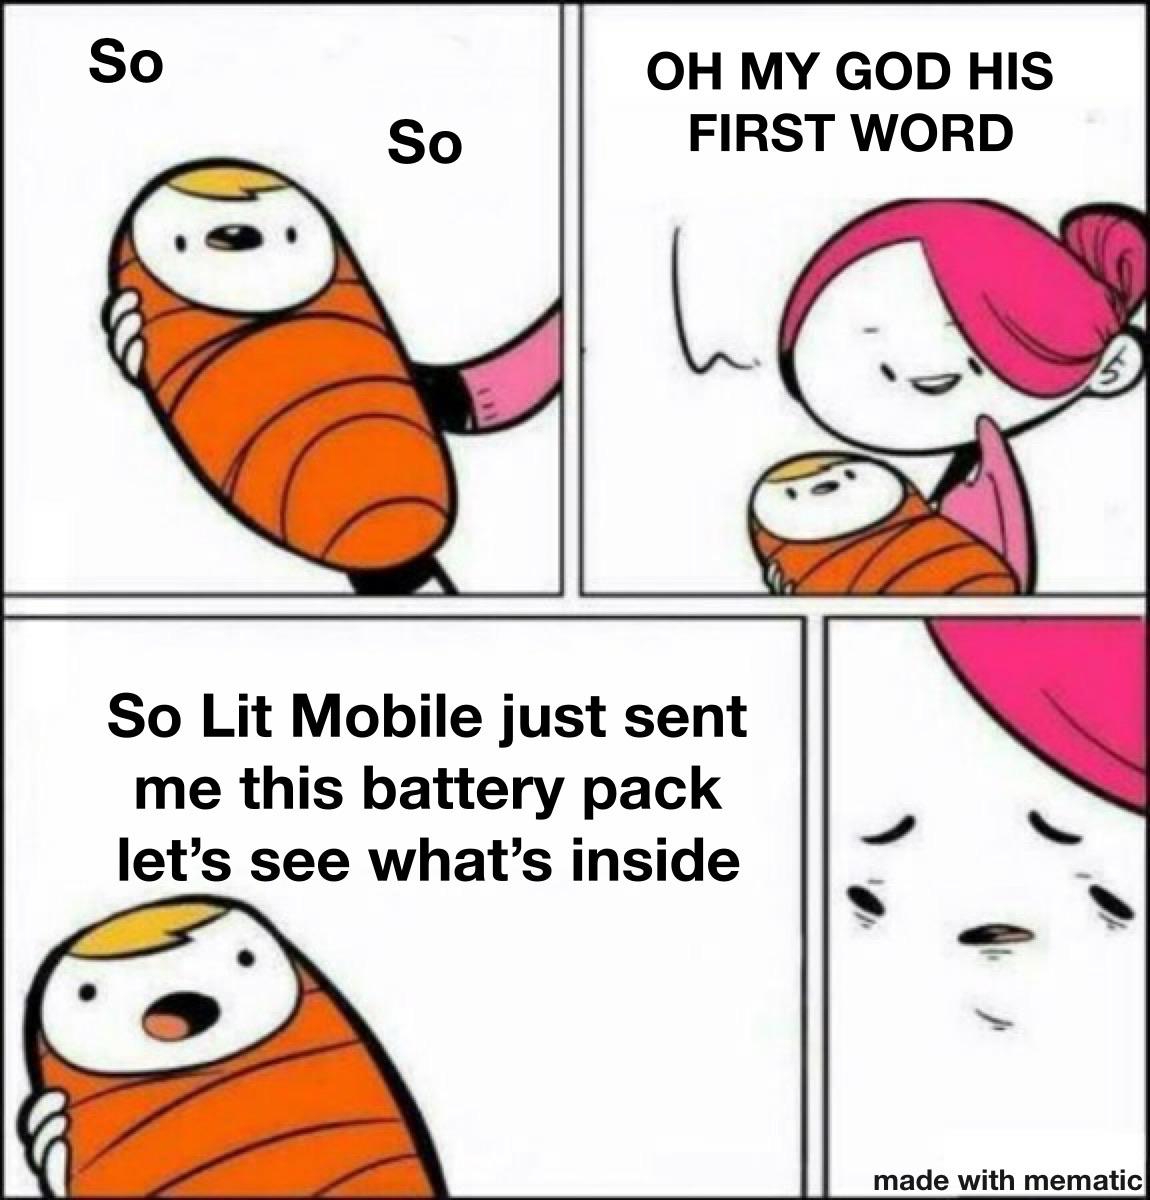 Funny, Let, BATTERY PACK, NOT CRAZY, Lit Mobile other memes Funny, Let, BATTERY PACK, NOT CRAZY, Lit Mobile text: so So OH MY GOD HIS FIRST WORD So Lit Mobile just sent me this battery pack let's see what's inside made with mematic 